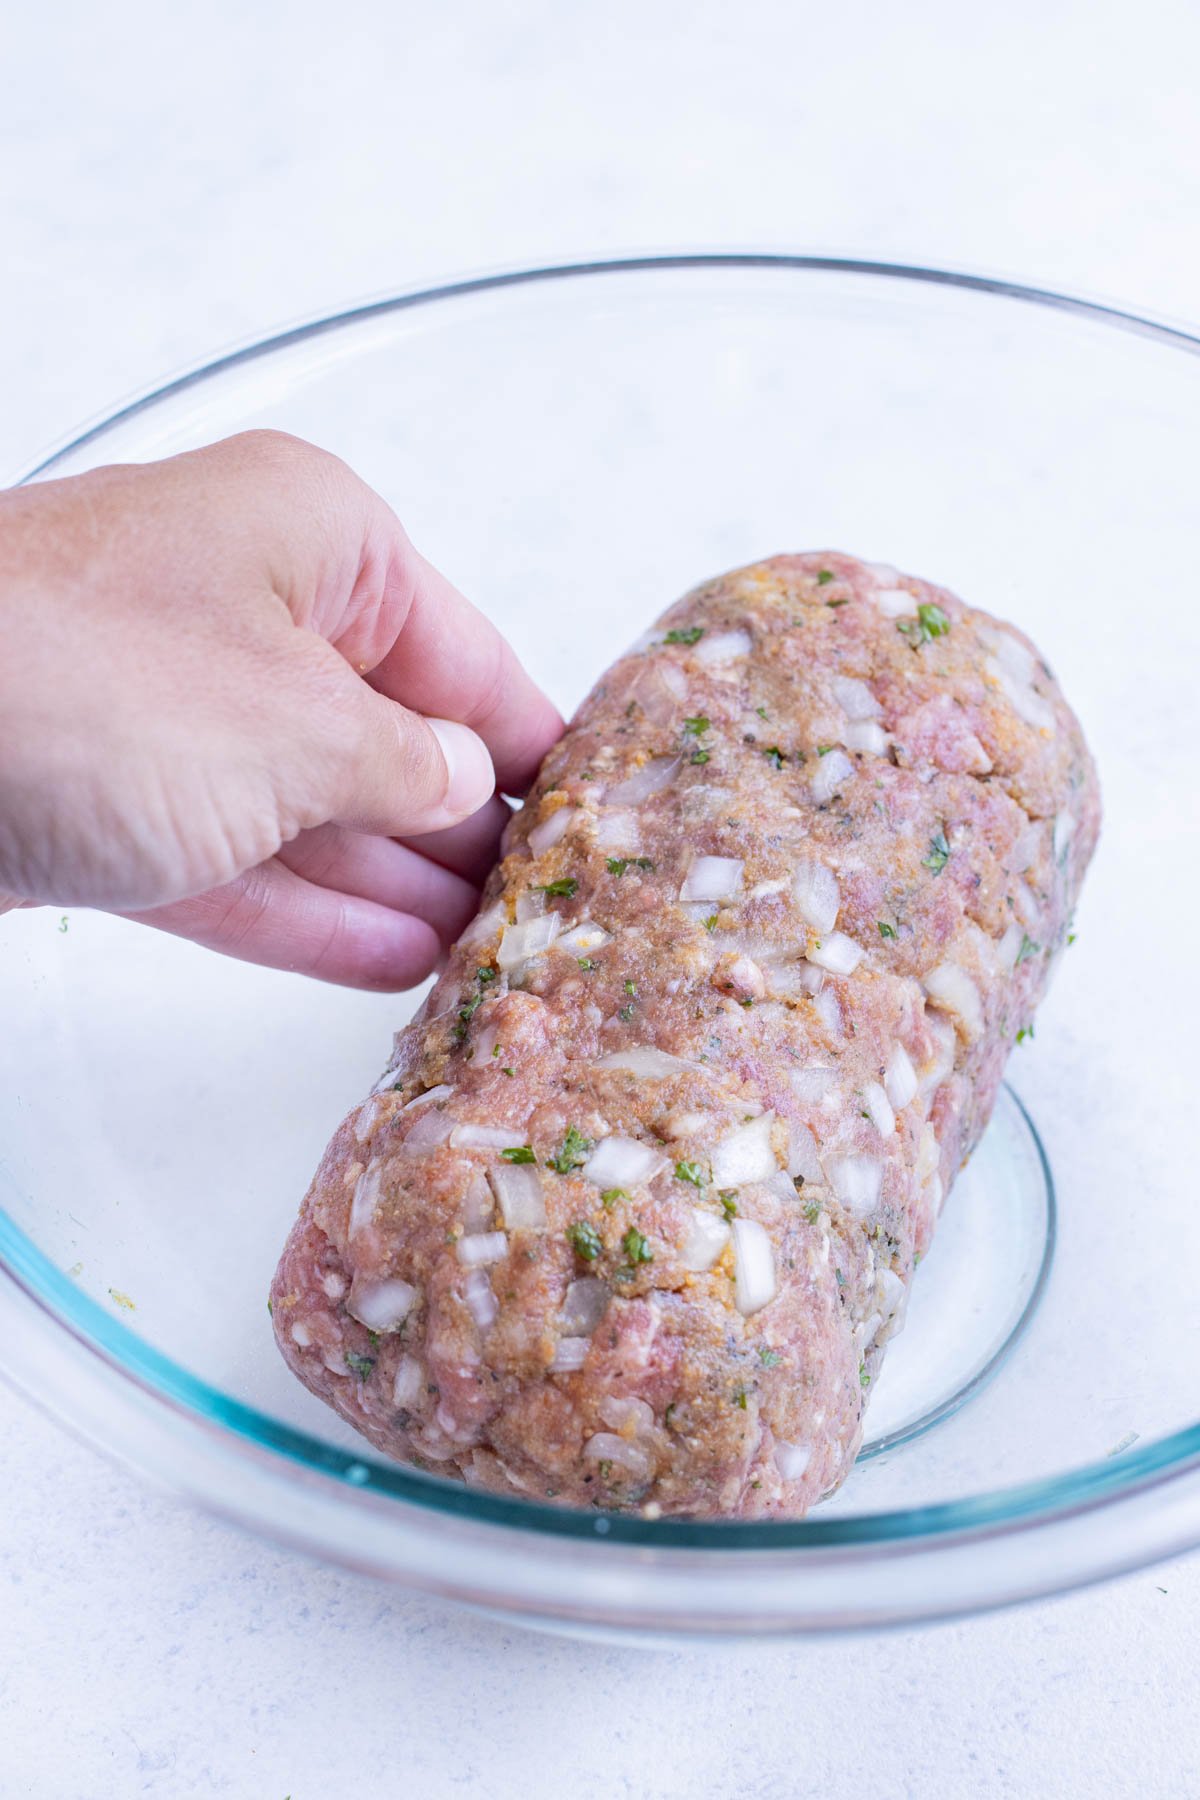 Hands shape the meatloaf mixture into a log.